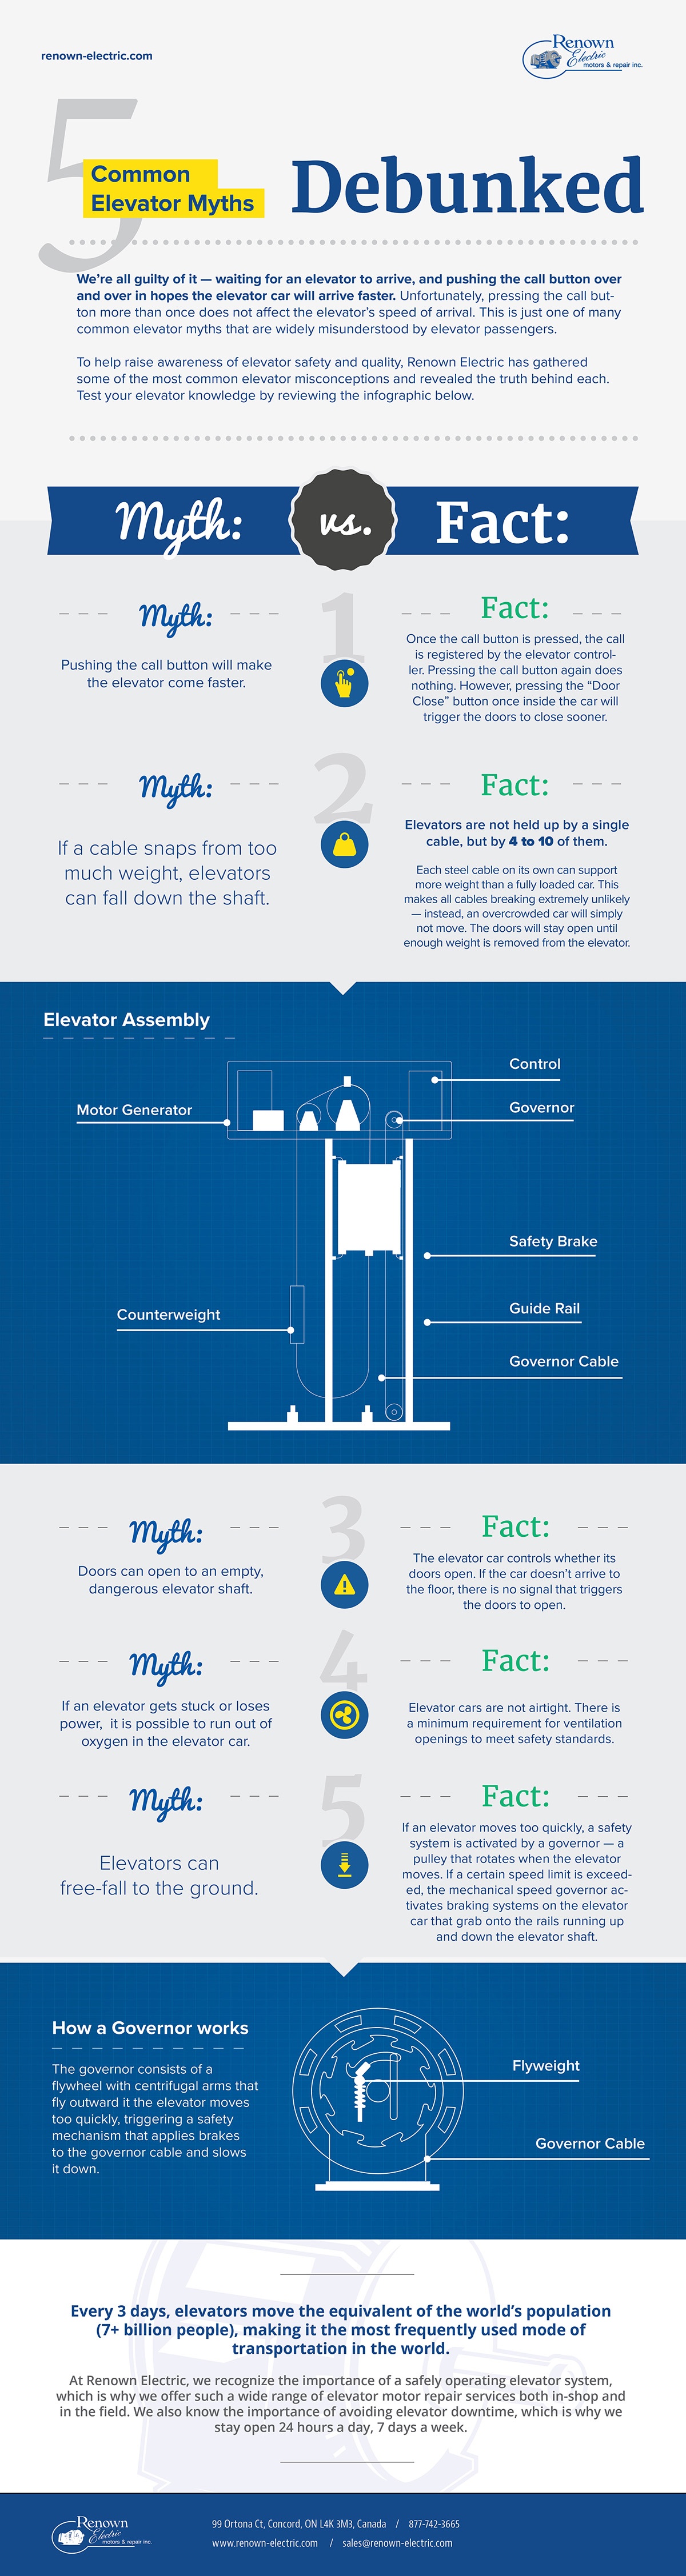 [INFOGRAPHIC] 5 Common Elevator Myths - Debunked”><a href=